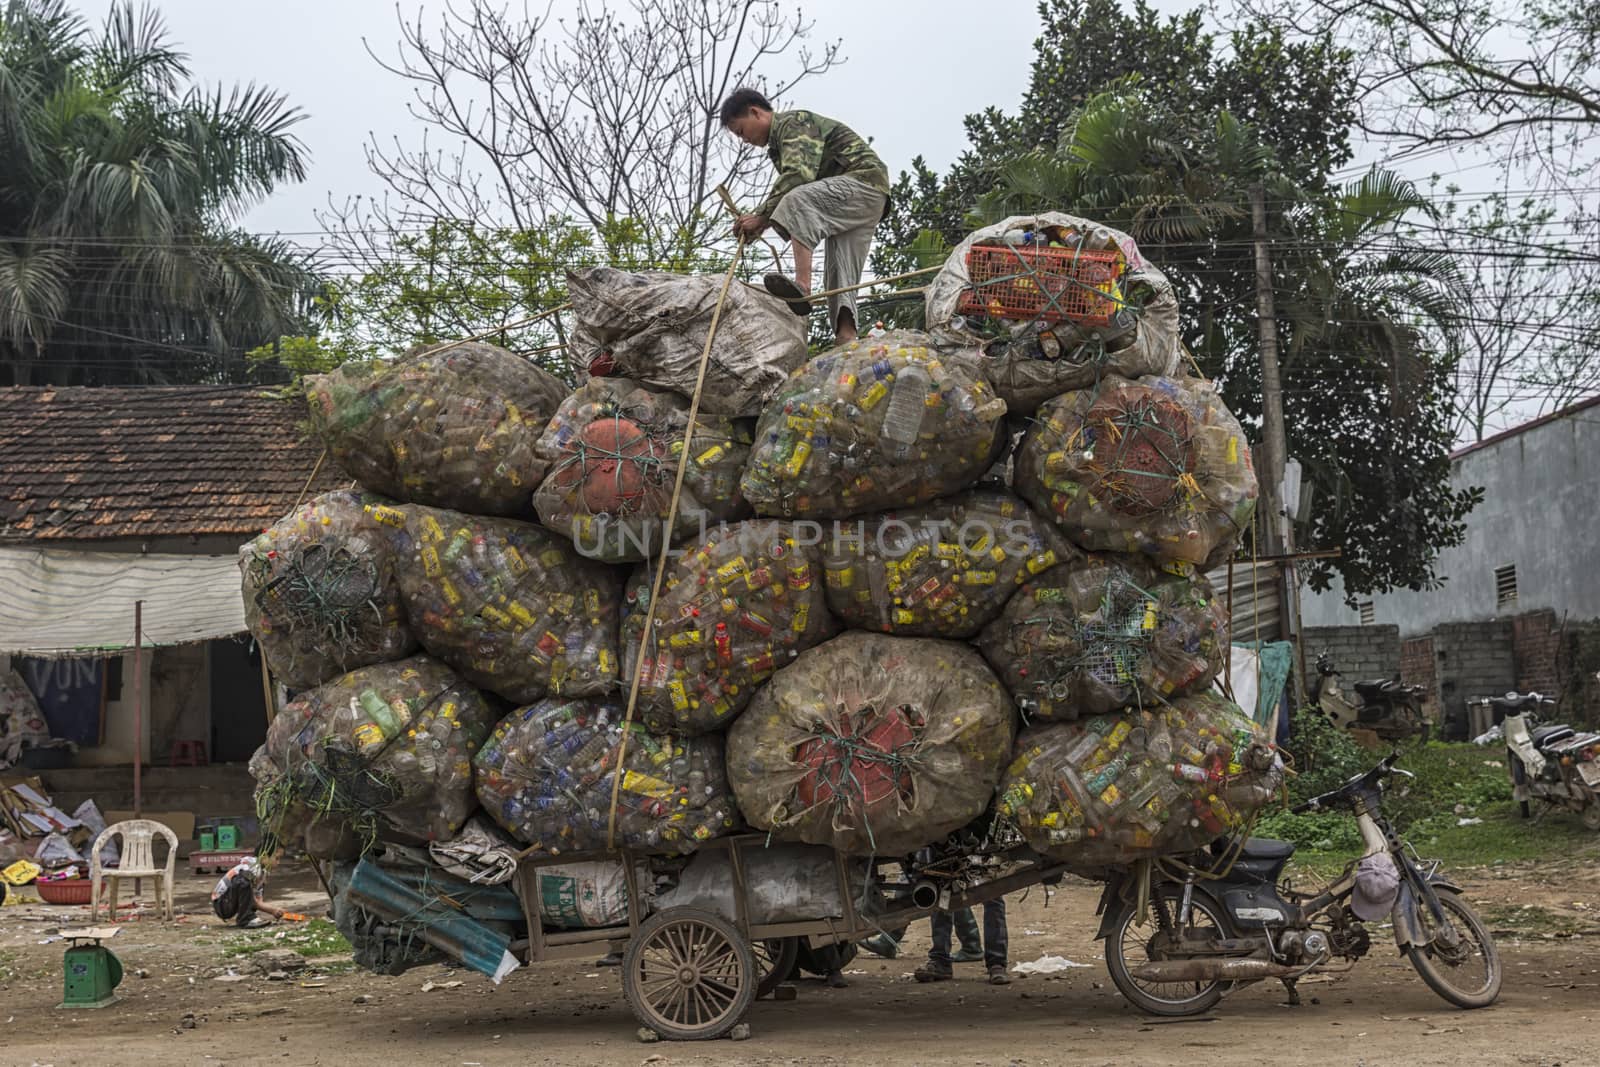 HANOI, VIETNAM - CIRCA MARCH 2012: Recycling cans and bottles loaded on cart behind motorbike. Voluminous colorful and amazing proposition.